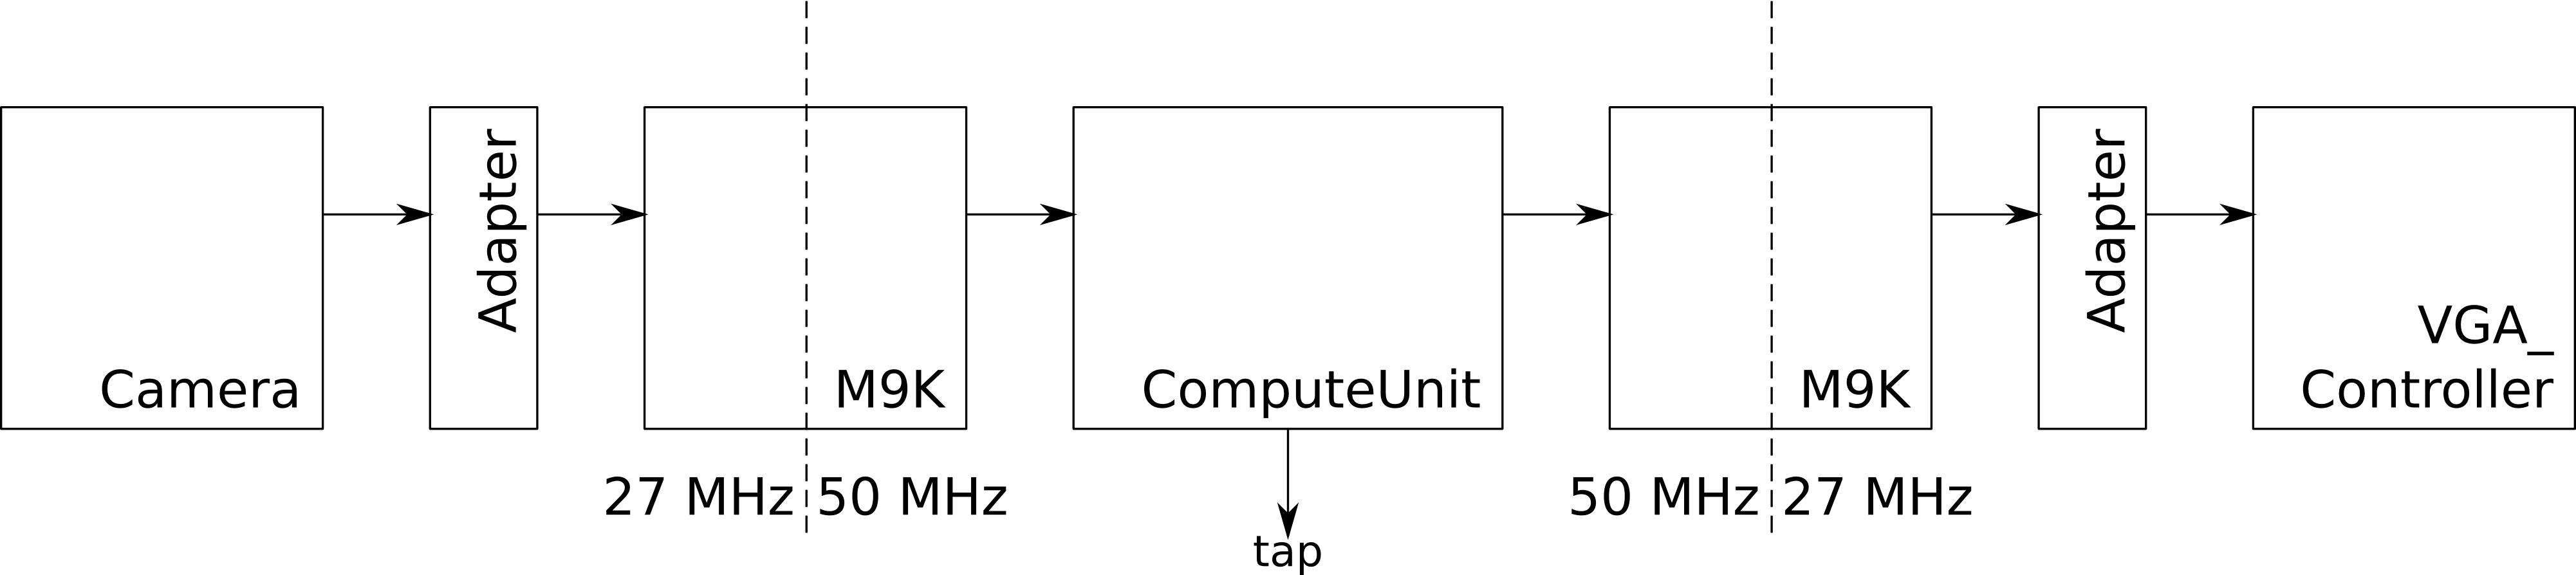 Flappy Bird, Interactive Components